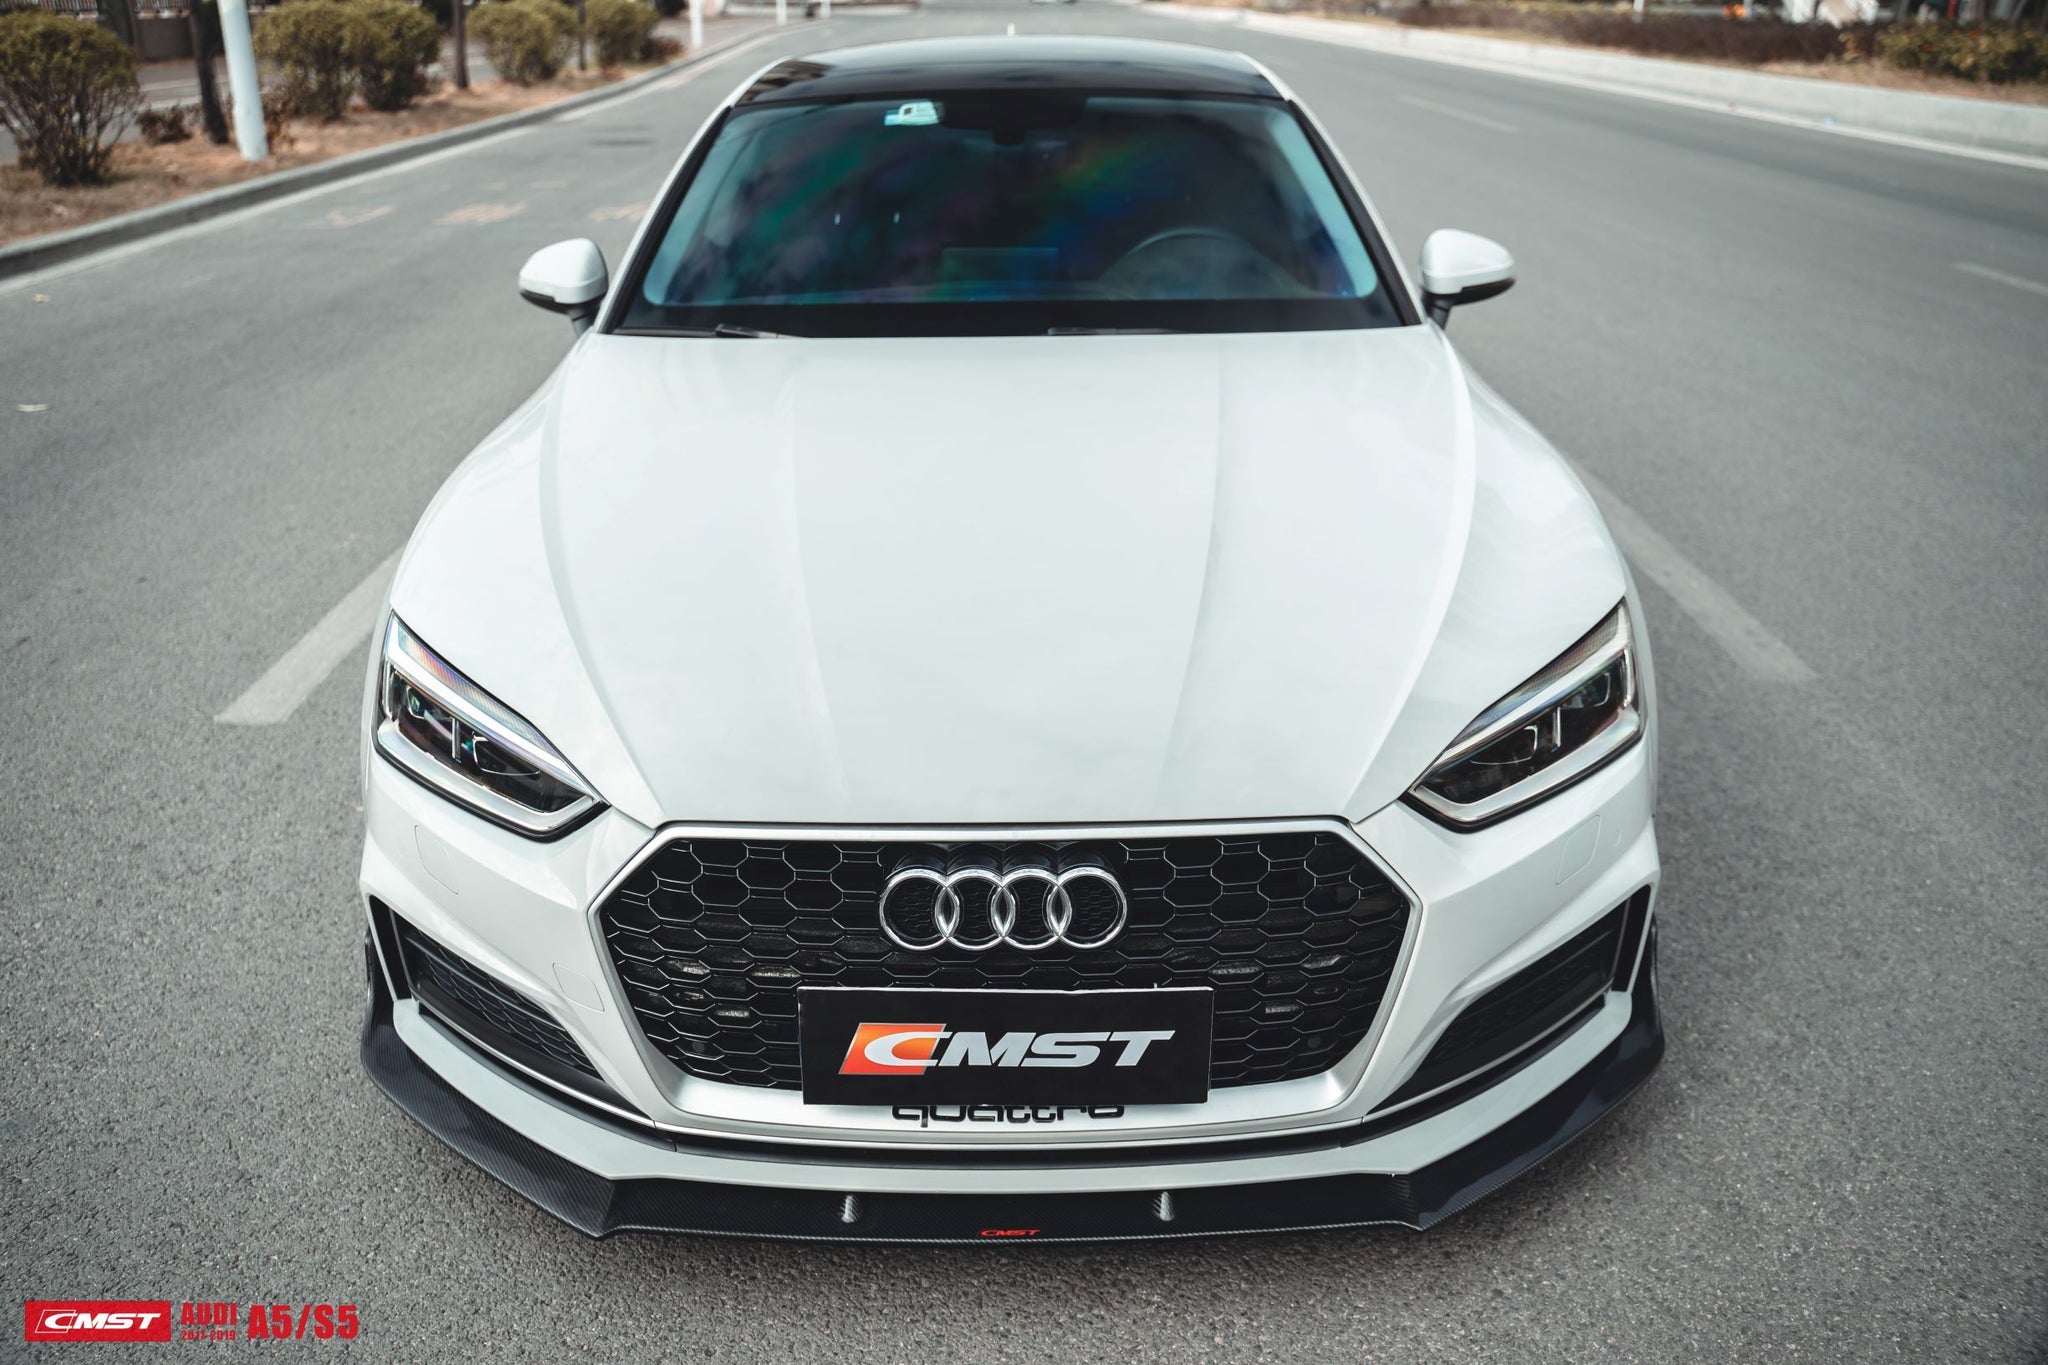 Check our price and buy CMST Carbon Fiber Body Kit set for Audi A5 / S5 B9!